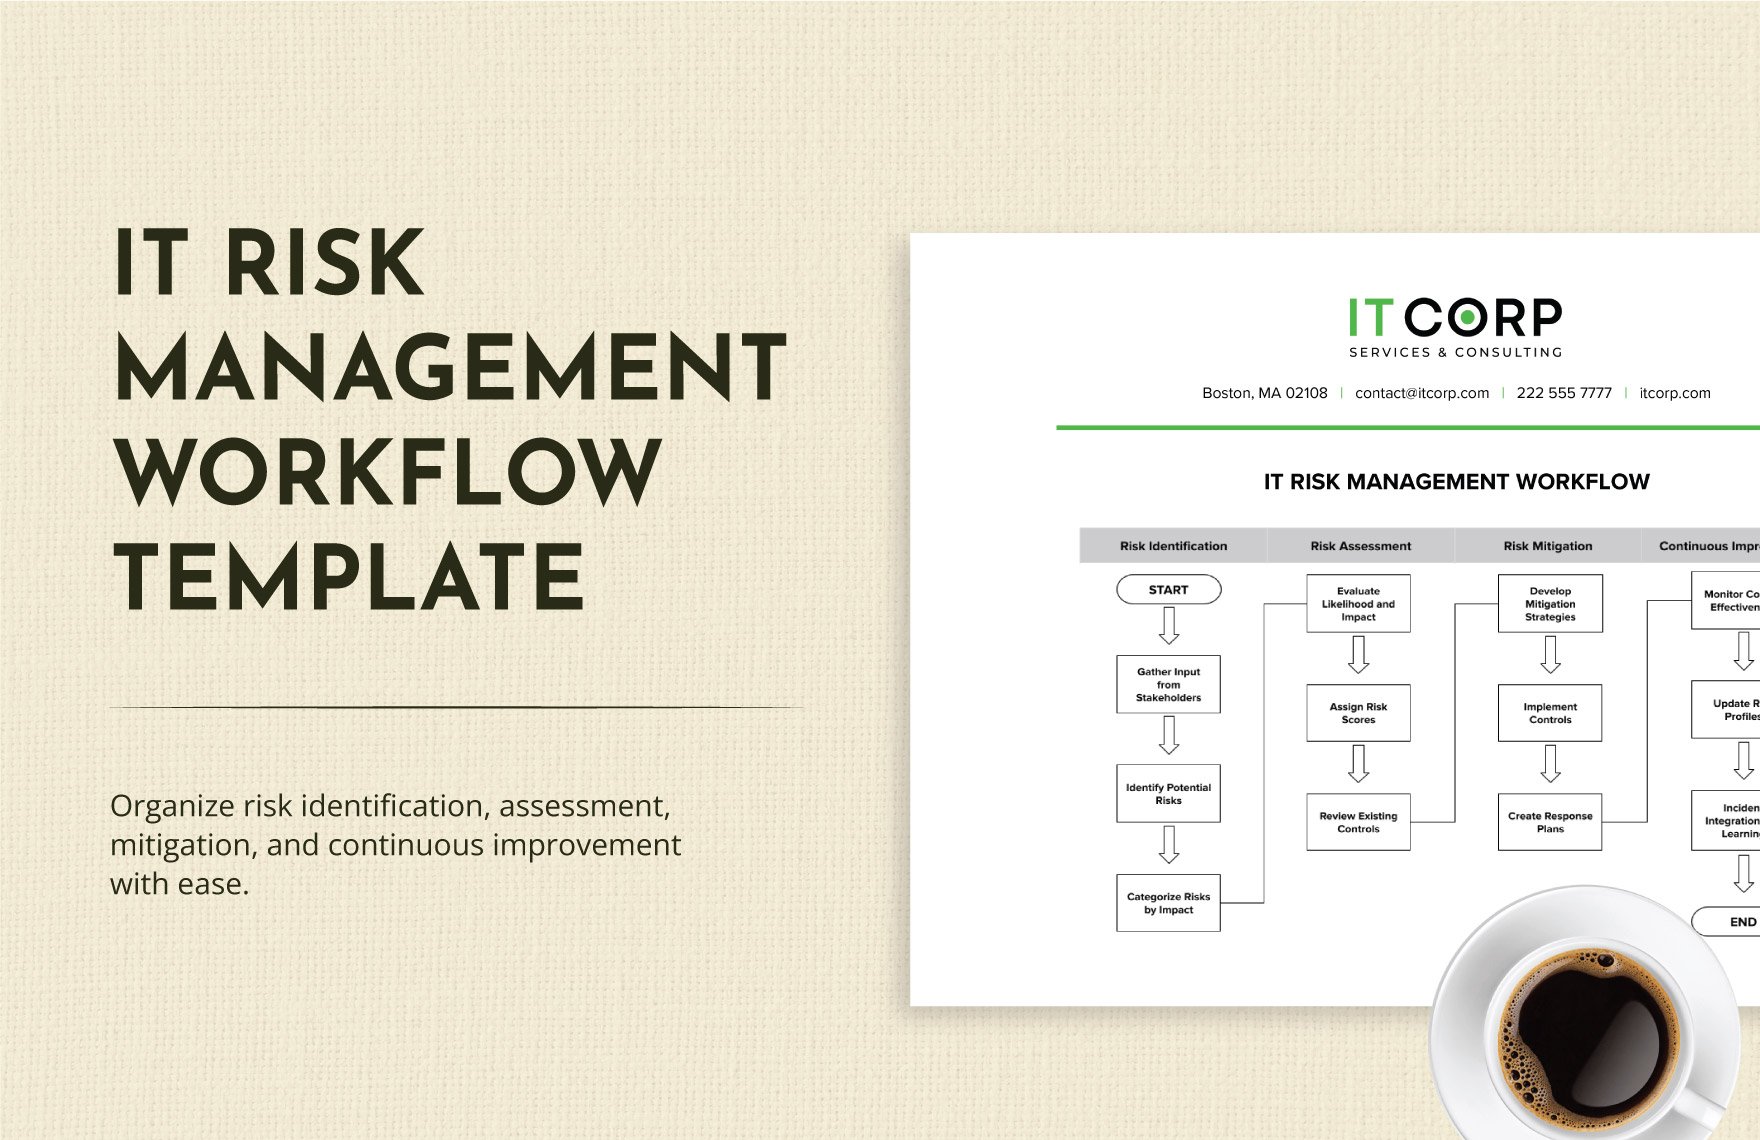 IT Risk Management Workflow Template